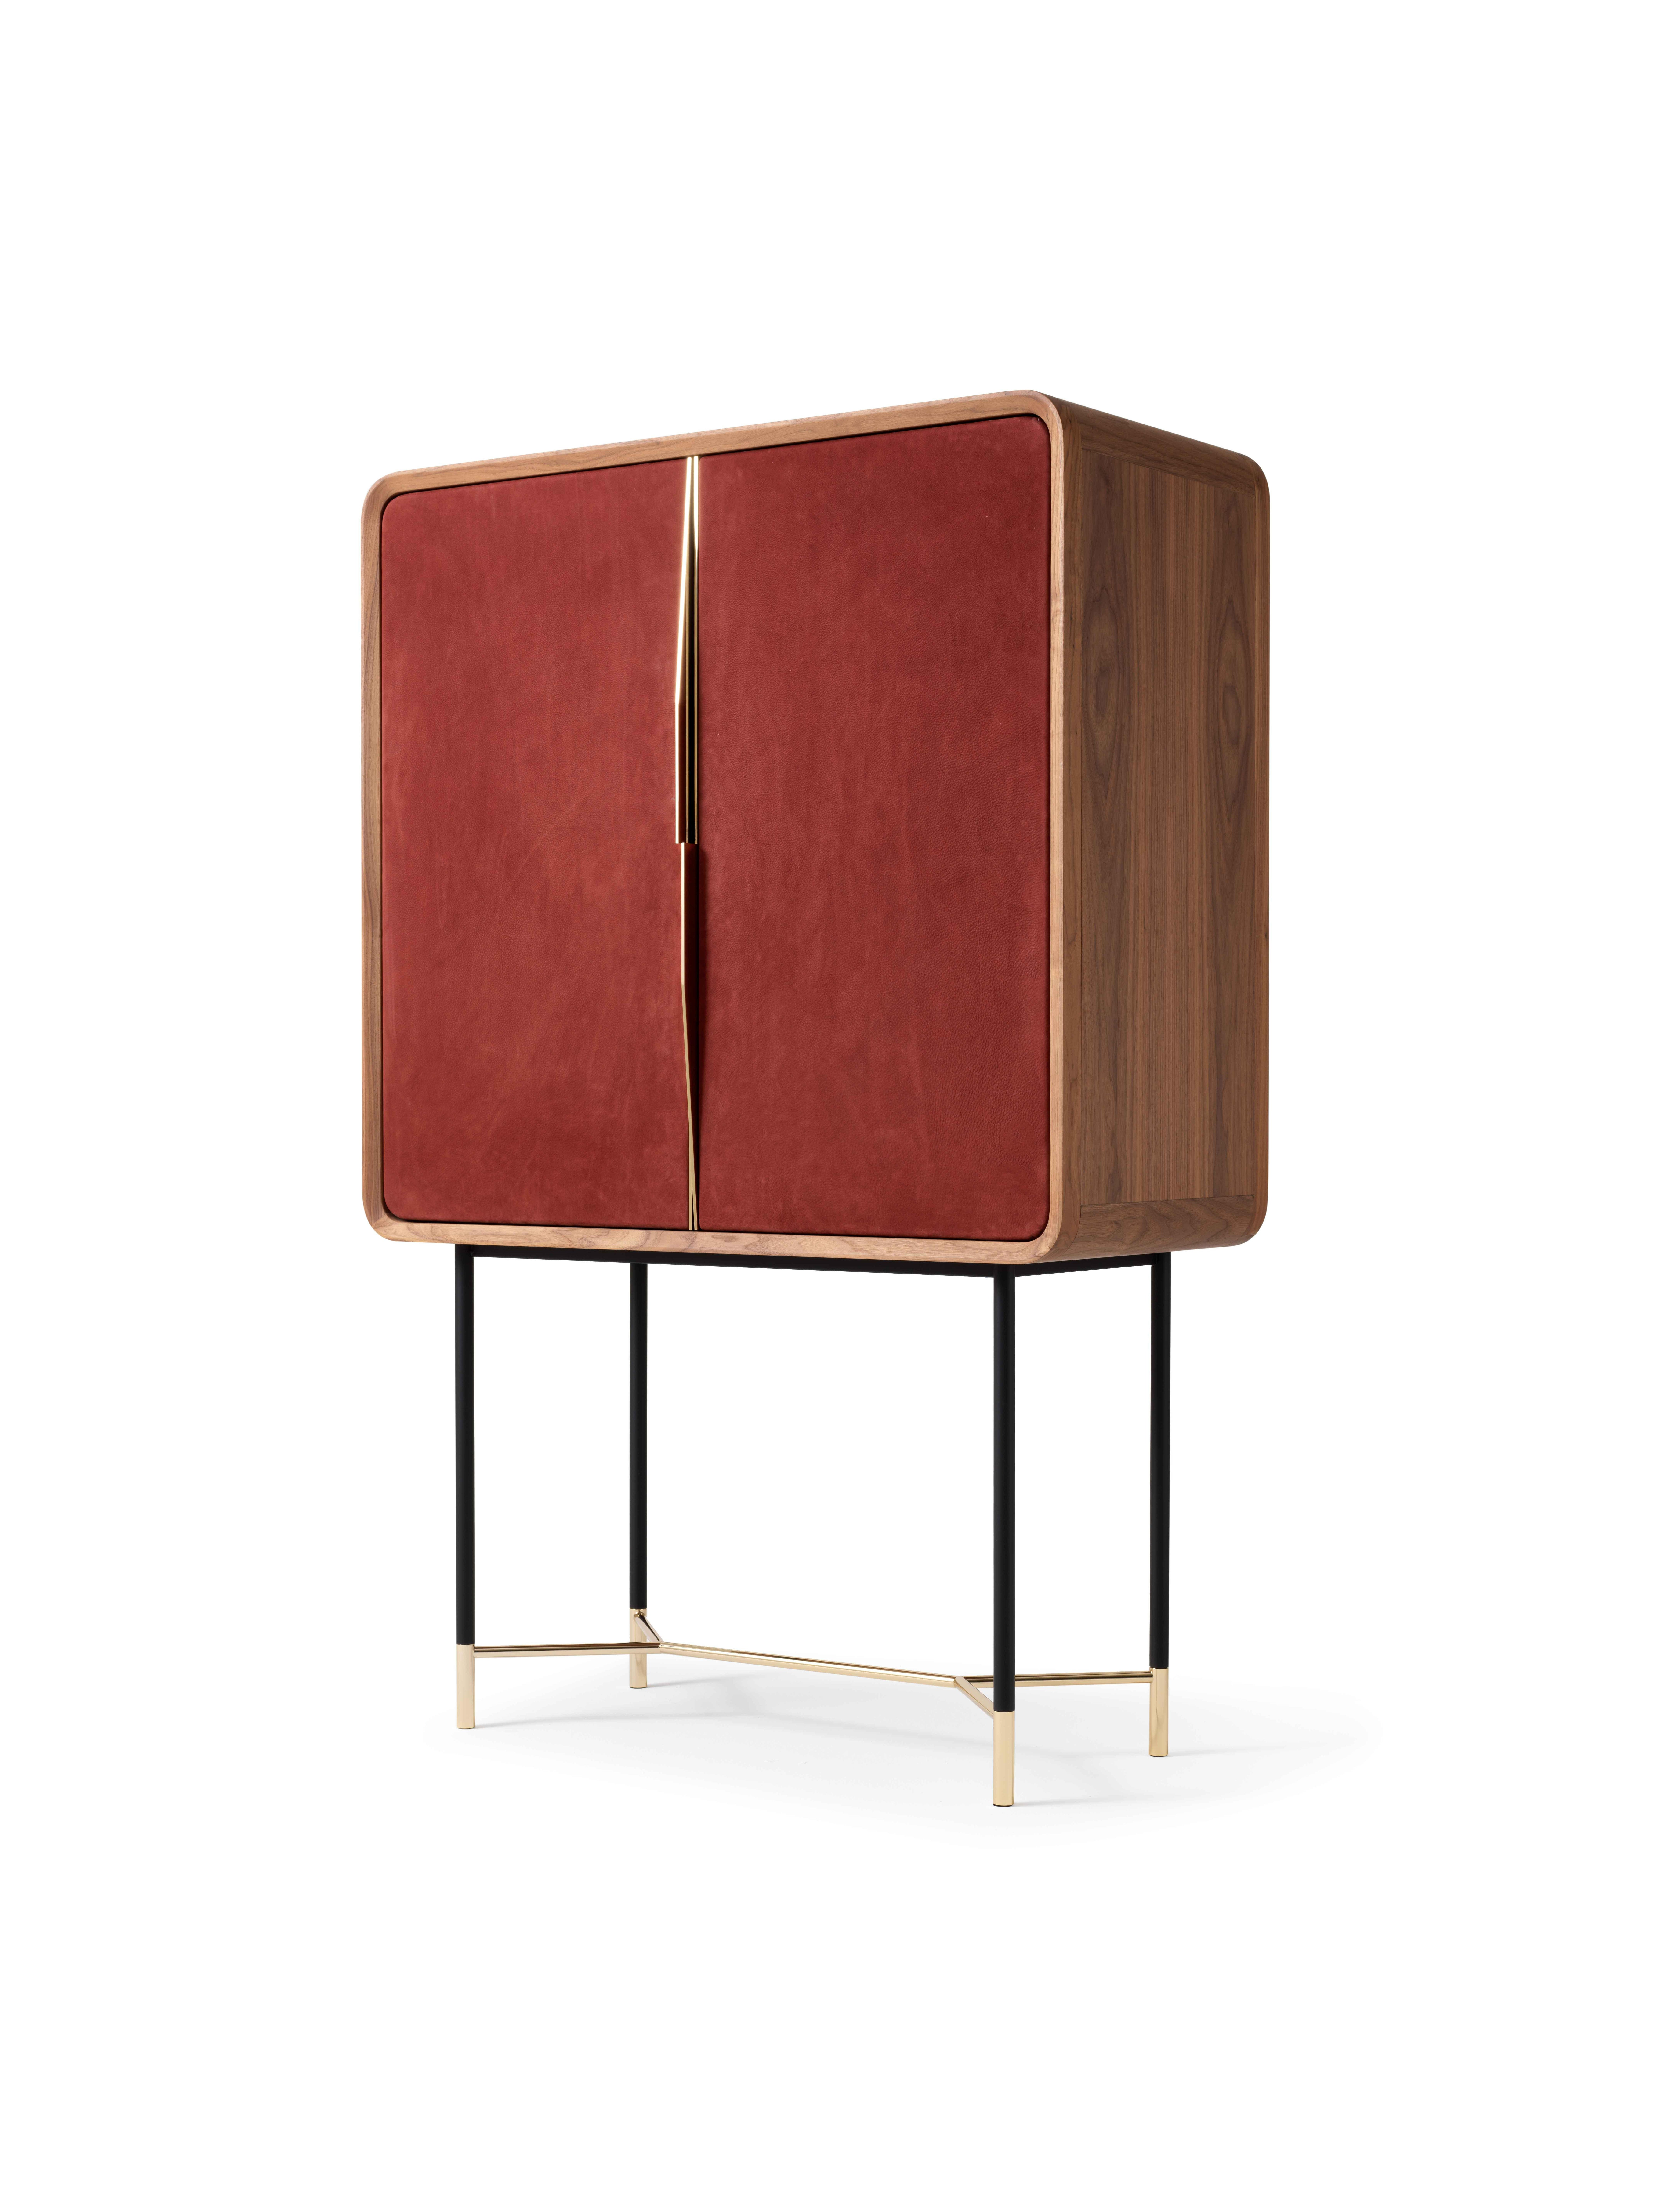 Bar Cabinet Chantal is an elegant and contemporary cabinet. Exquisite design by Andrea Pinori and Giorgio Balestri that makes it an ideal piece of furniture for storing refined bottles. Combining high quality materials, it has an American walnut